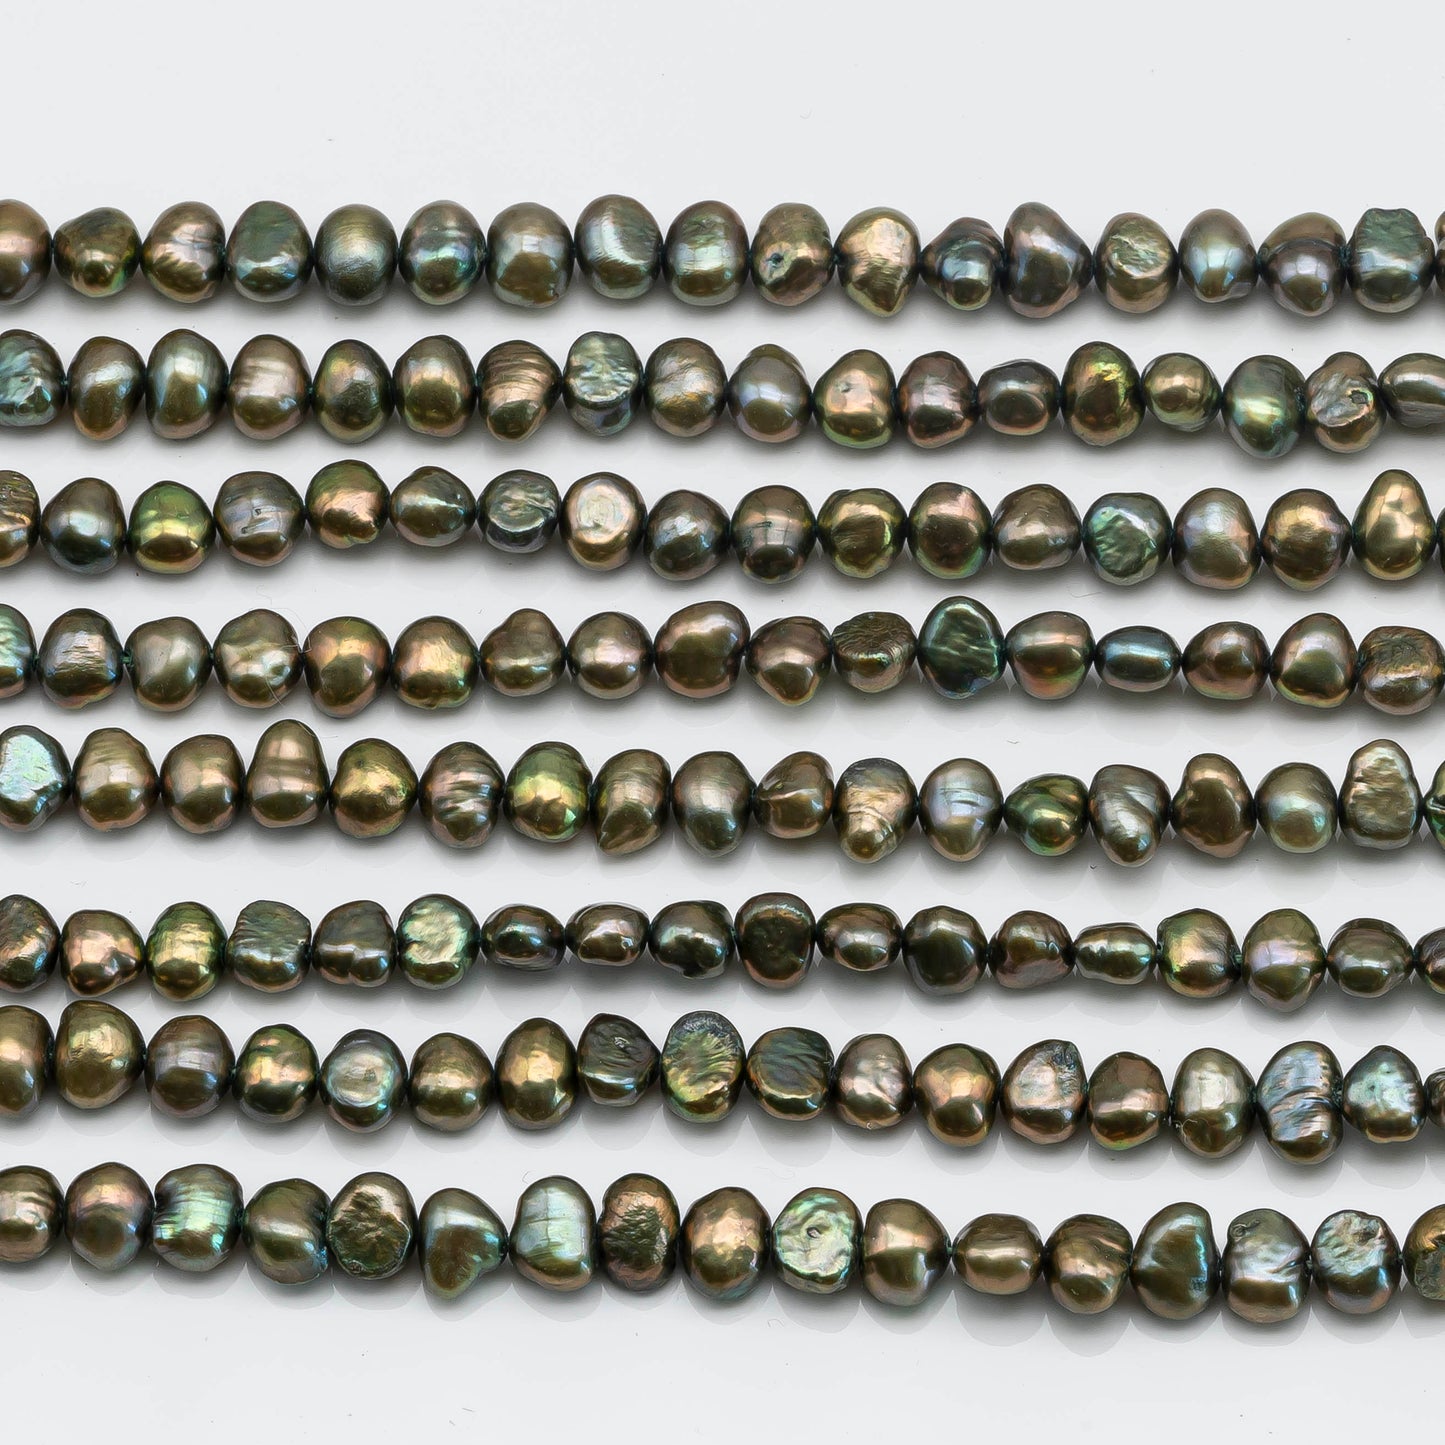 7-8mm Freshwater Pearl Nugget Shape Olive Green with Nice Luster in Full Strand for Making Jewelry, SKU # 1587FW